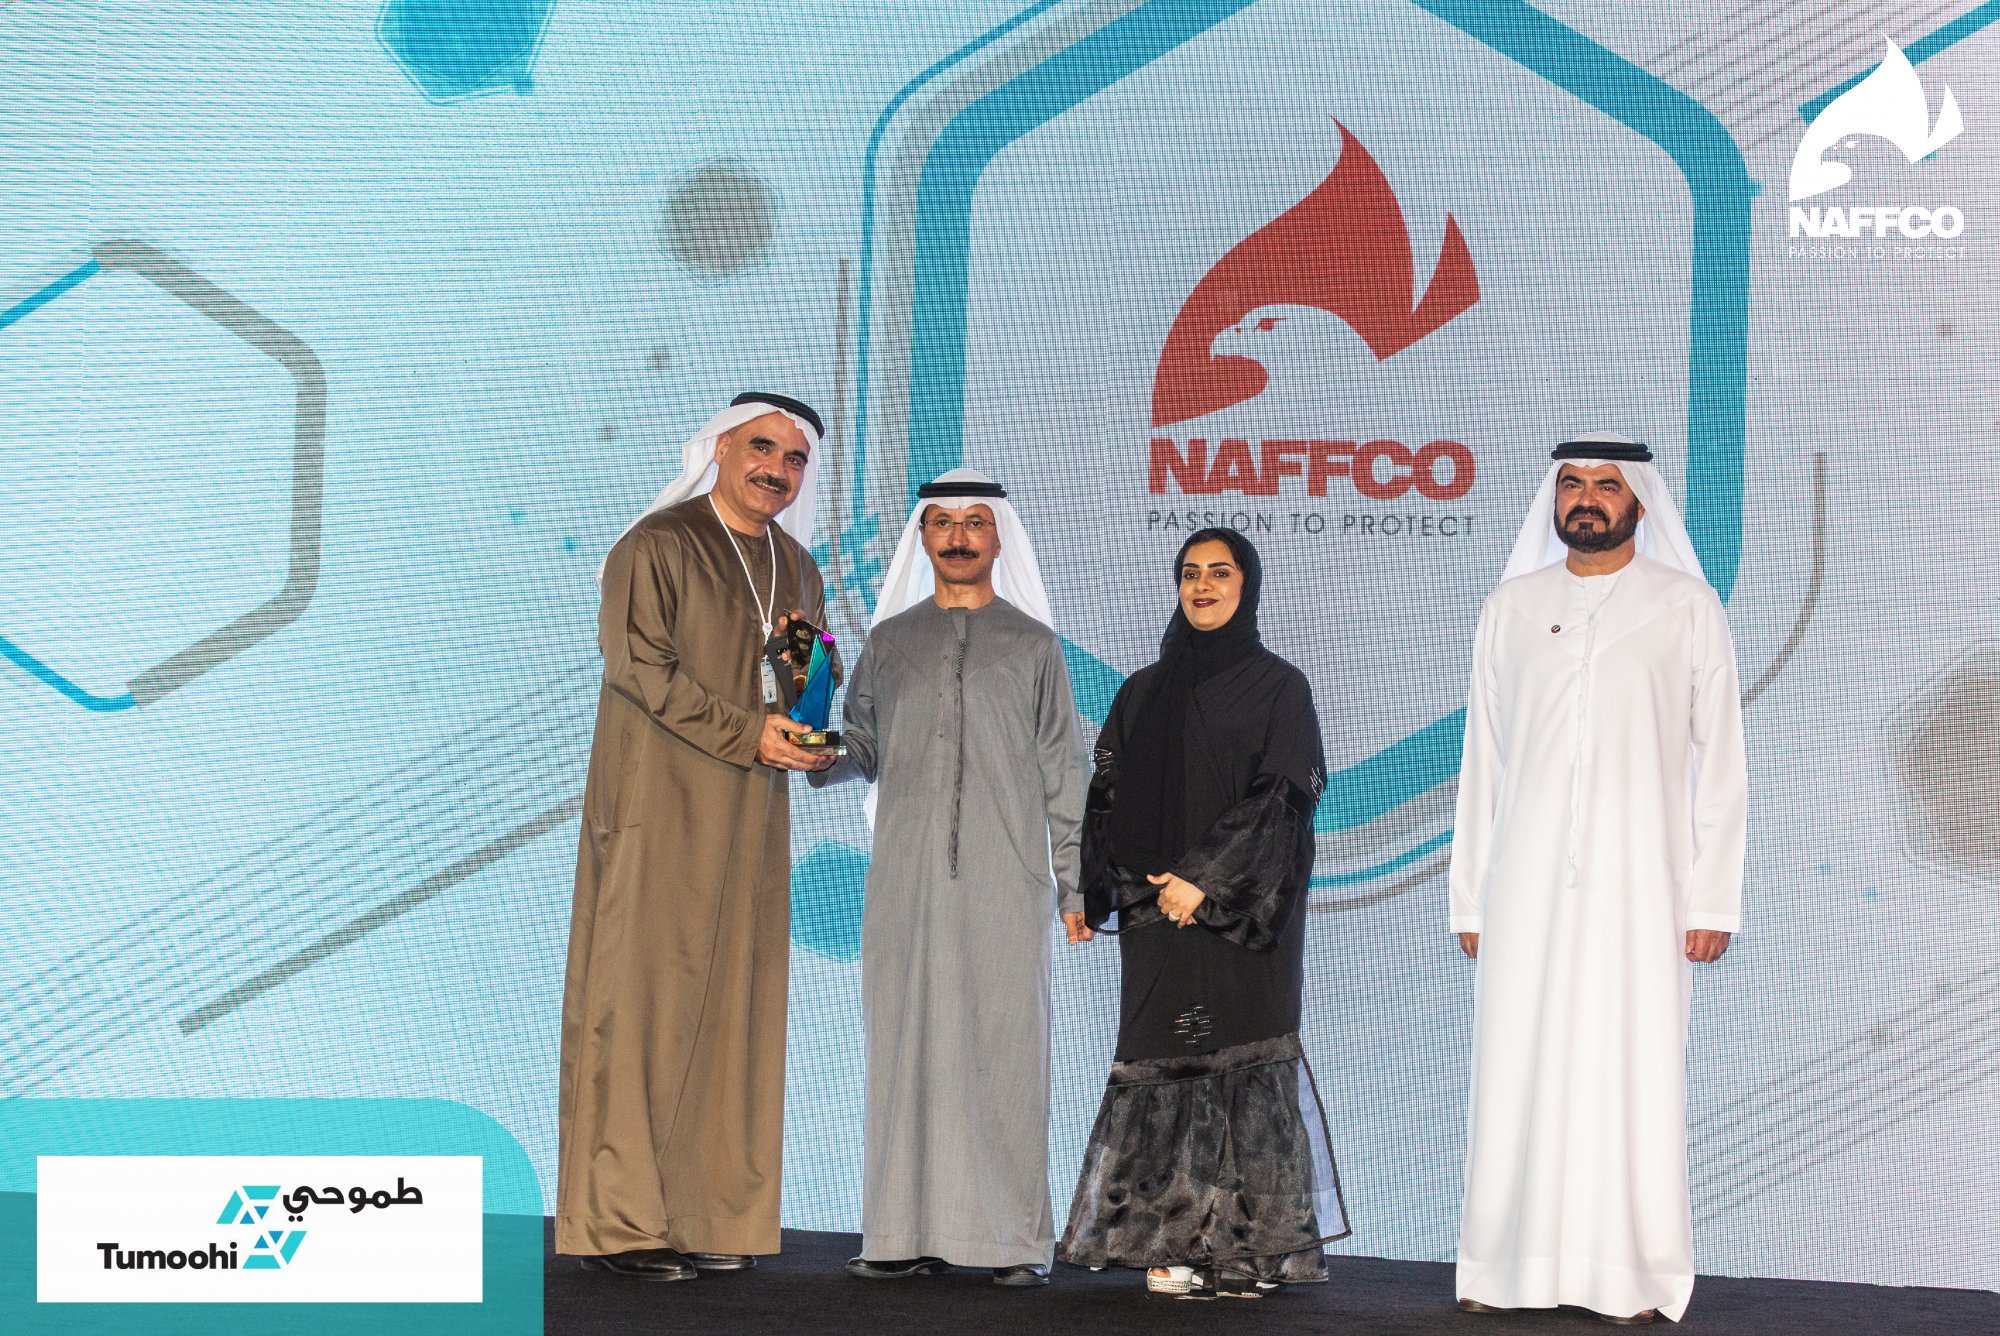 NAFFCO group CEO Eng. Kalid Al Khatib recieving an award from Sultan Ahmed Bin Sulayem, Chairman and CEO of DP World Group